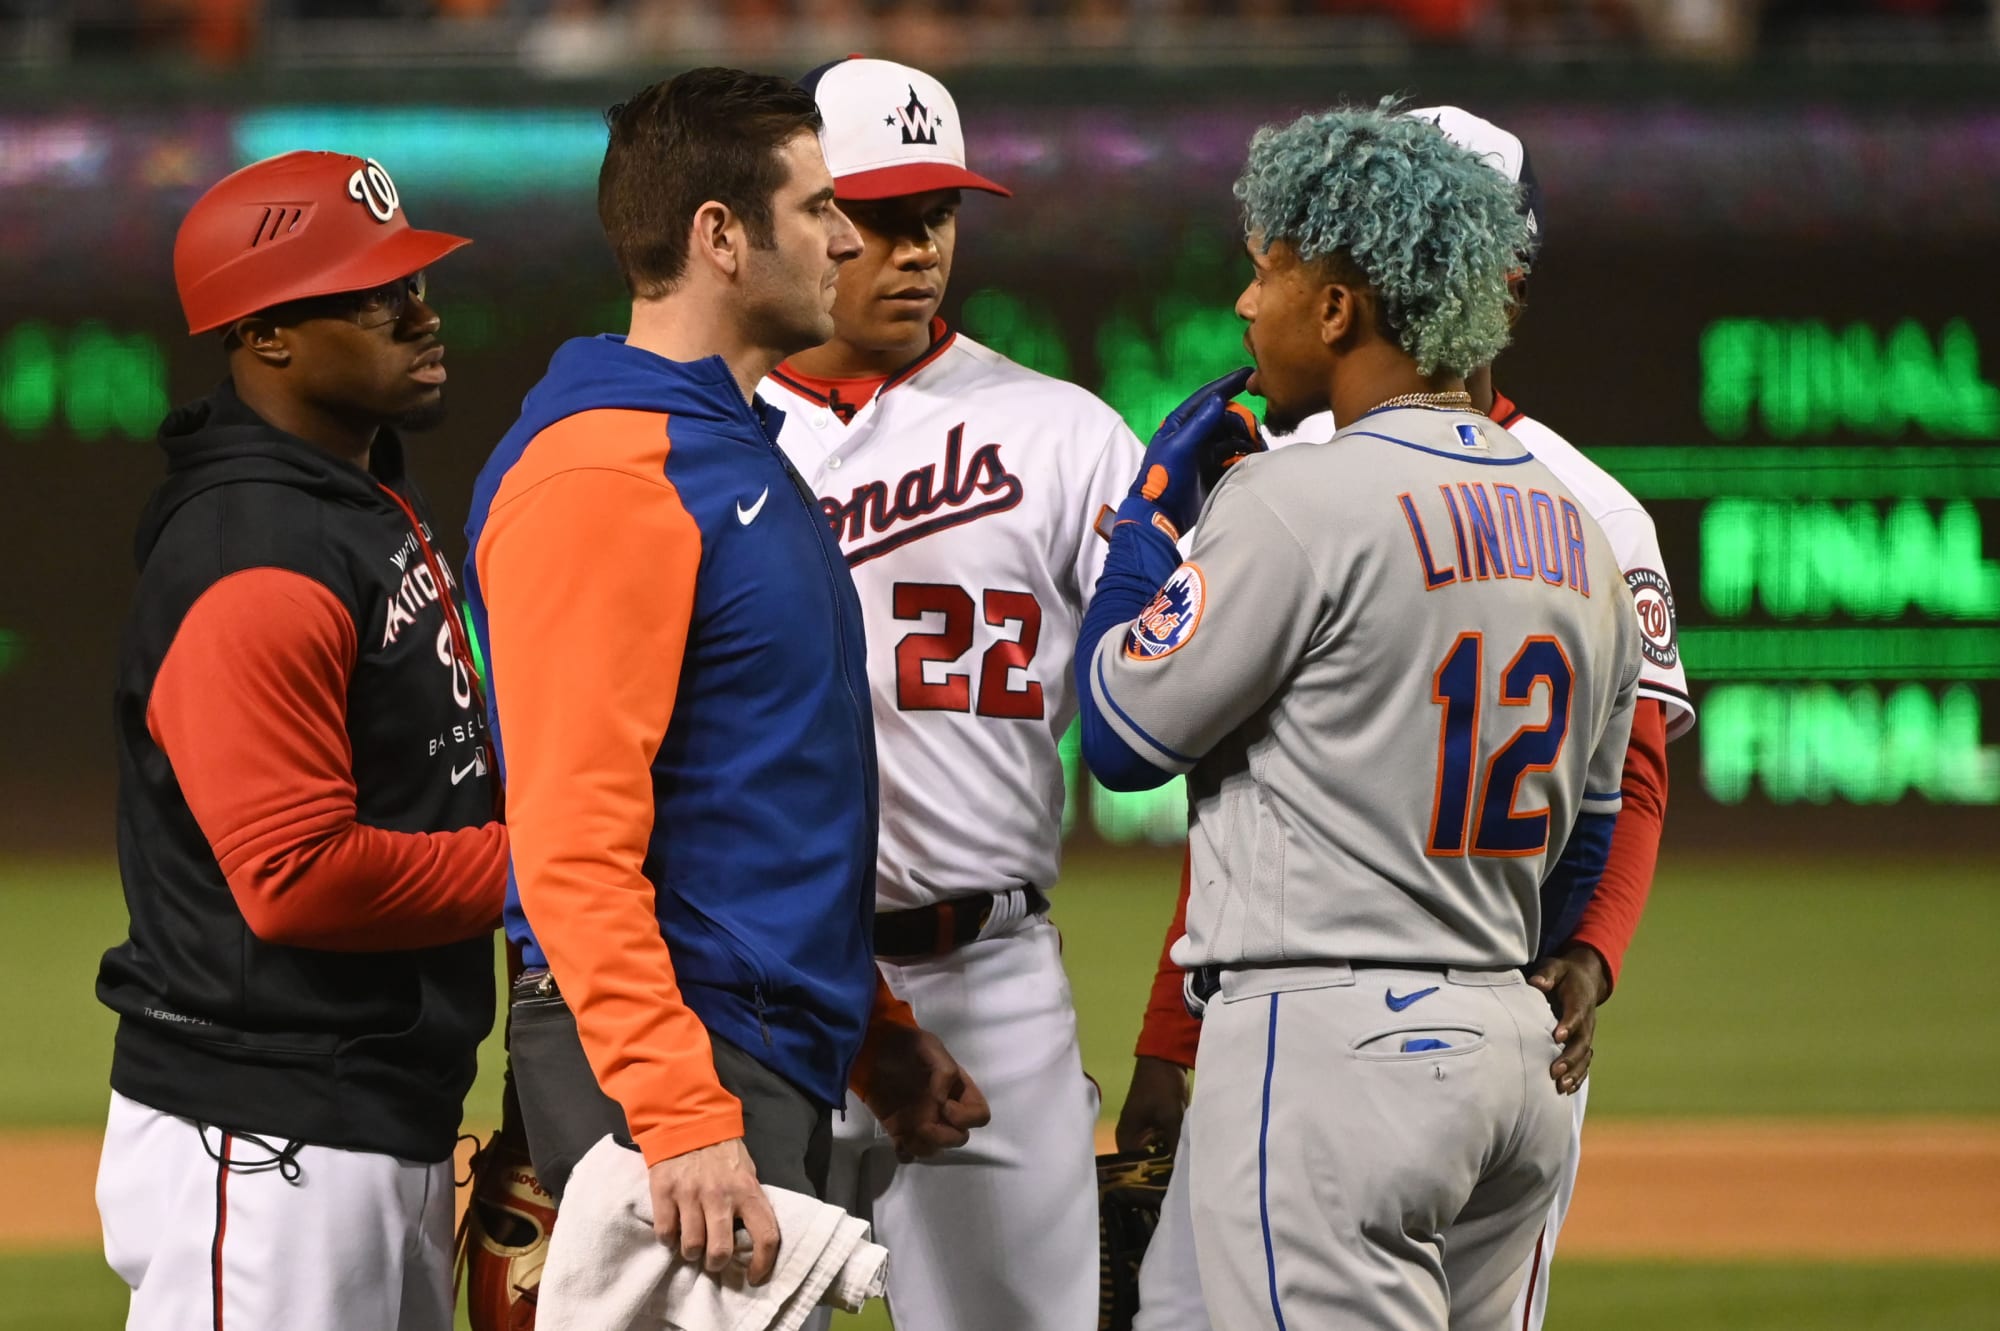 Mets vs Nationals bench-clearing brawl: Who will be suspended?